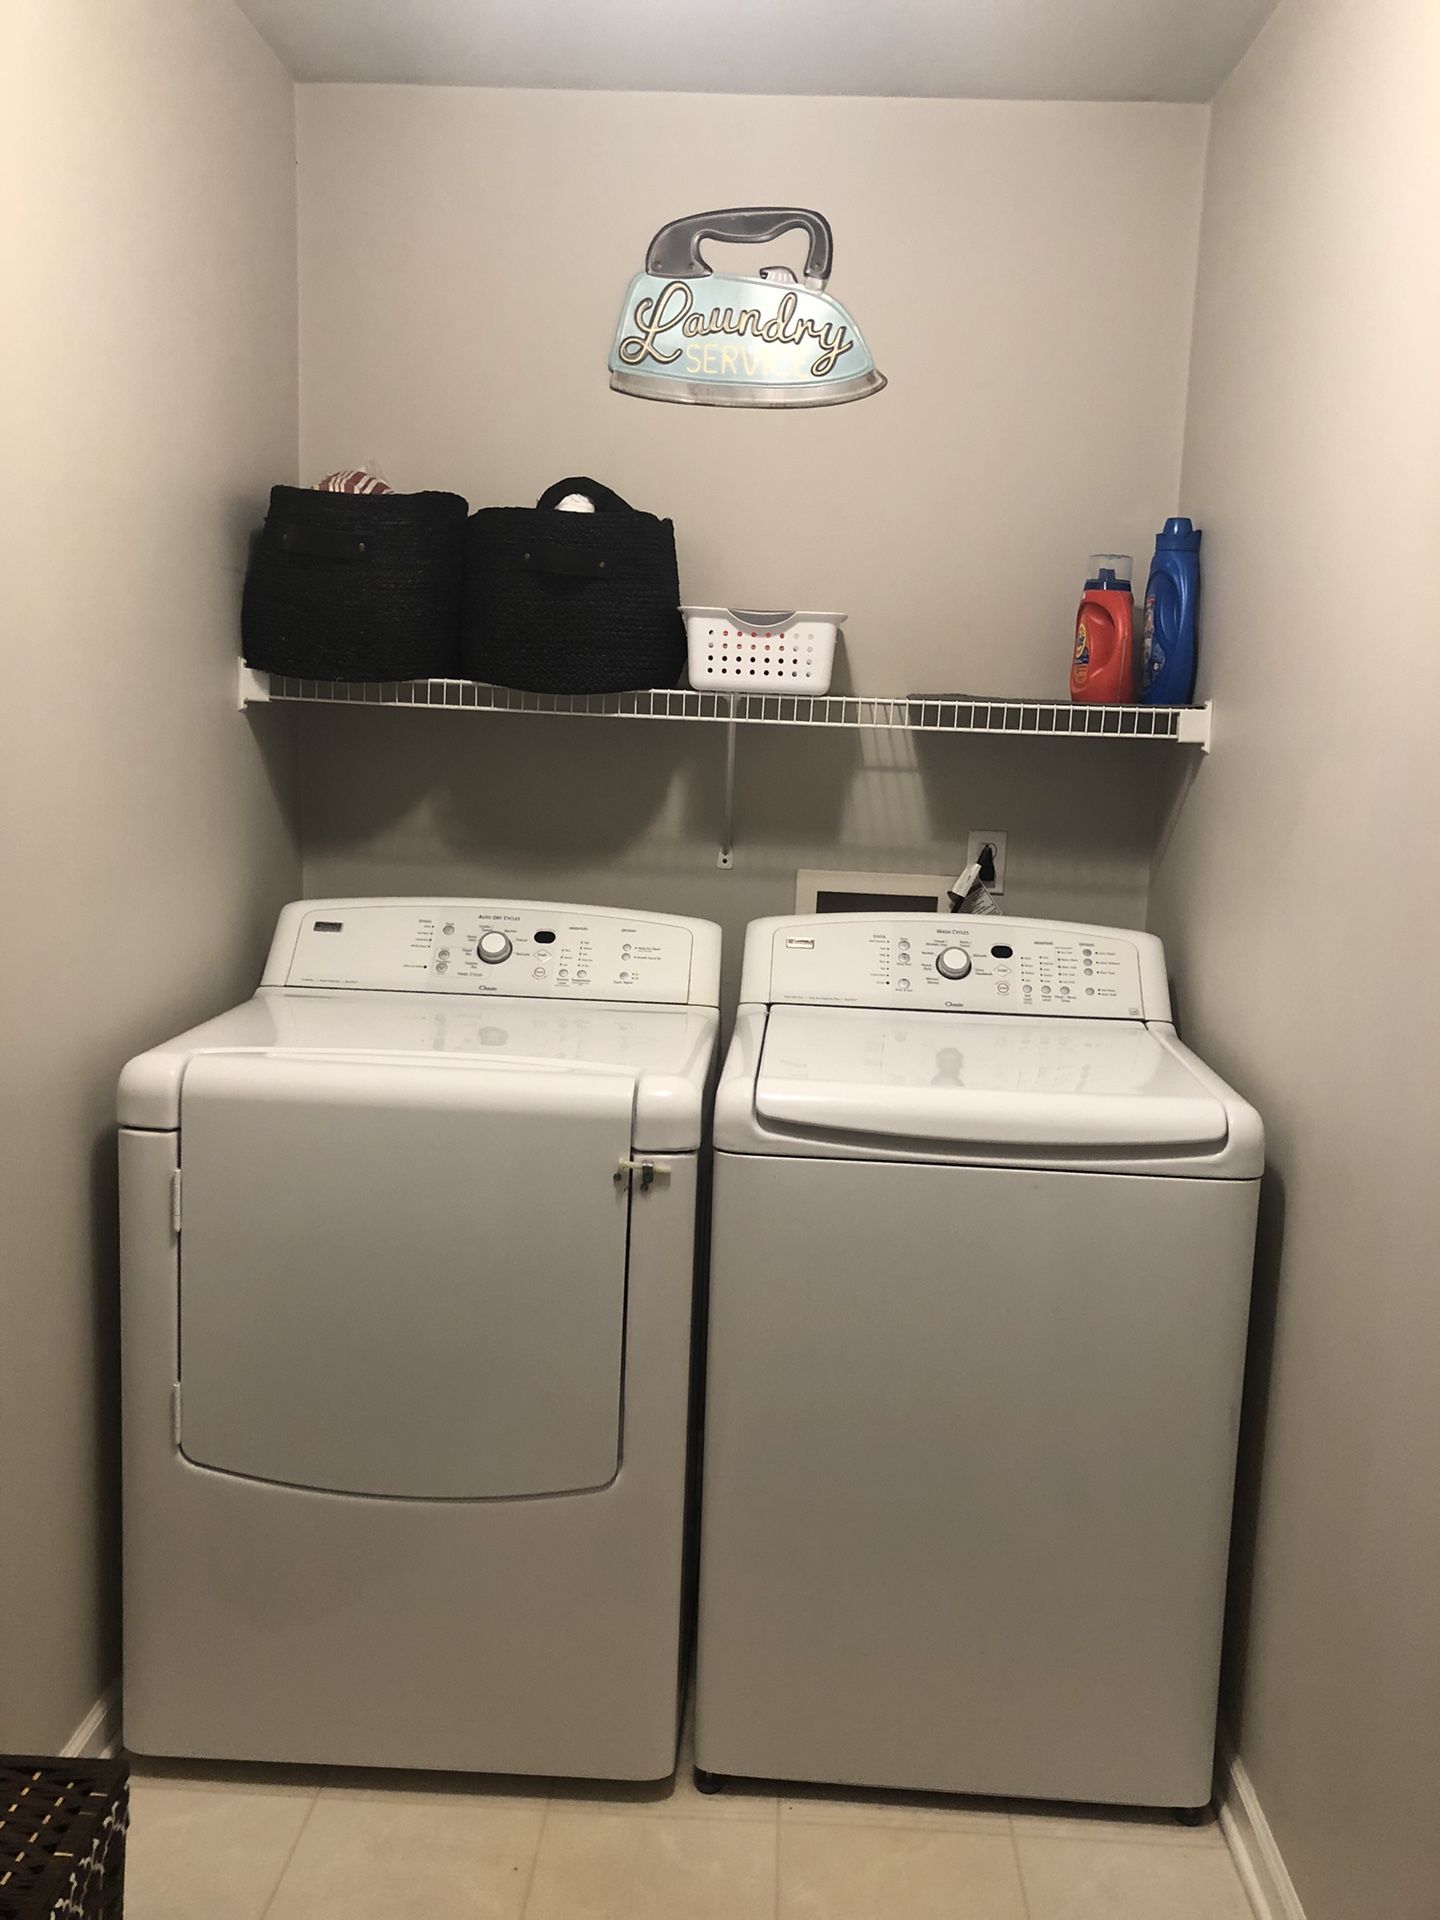 Kenmore Elite Washer And Dryer. 